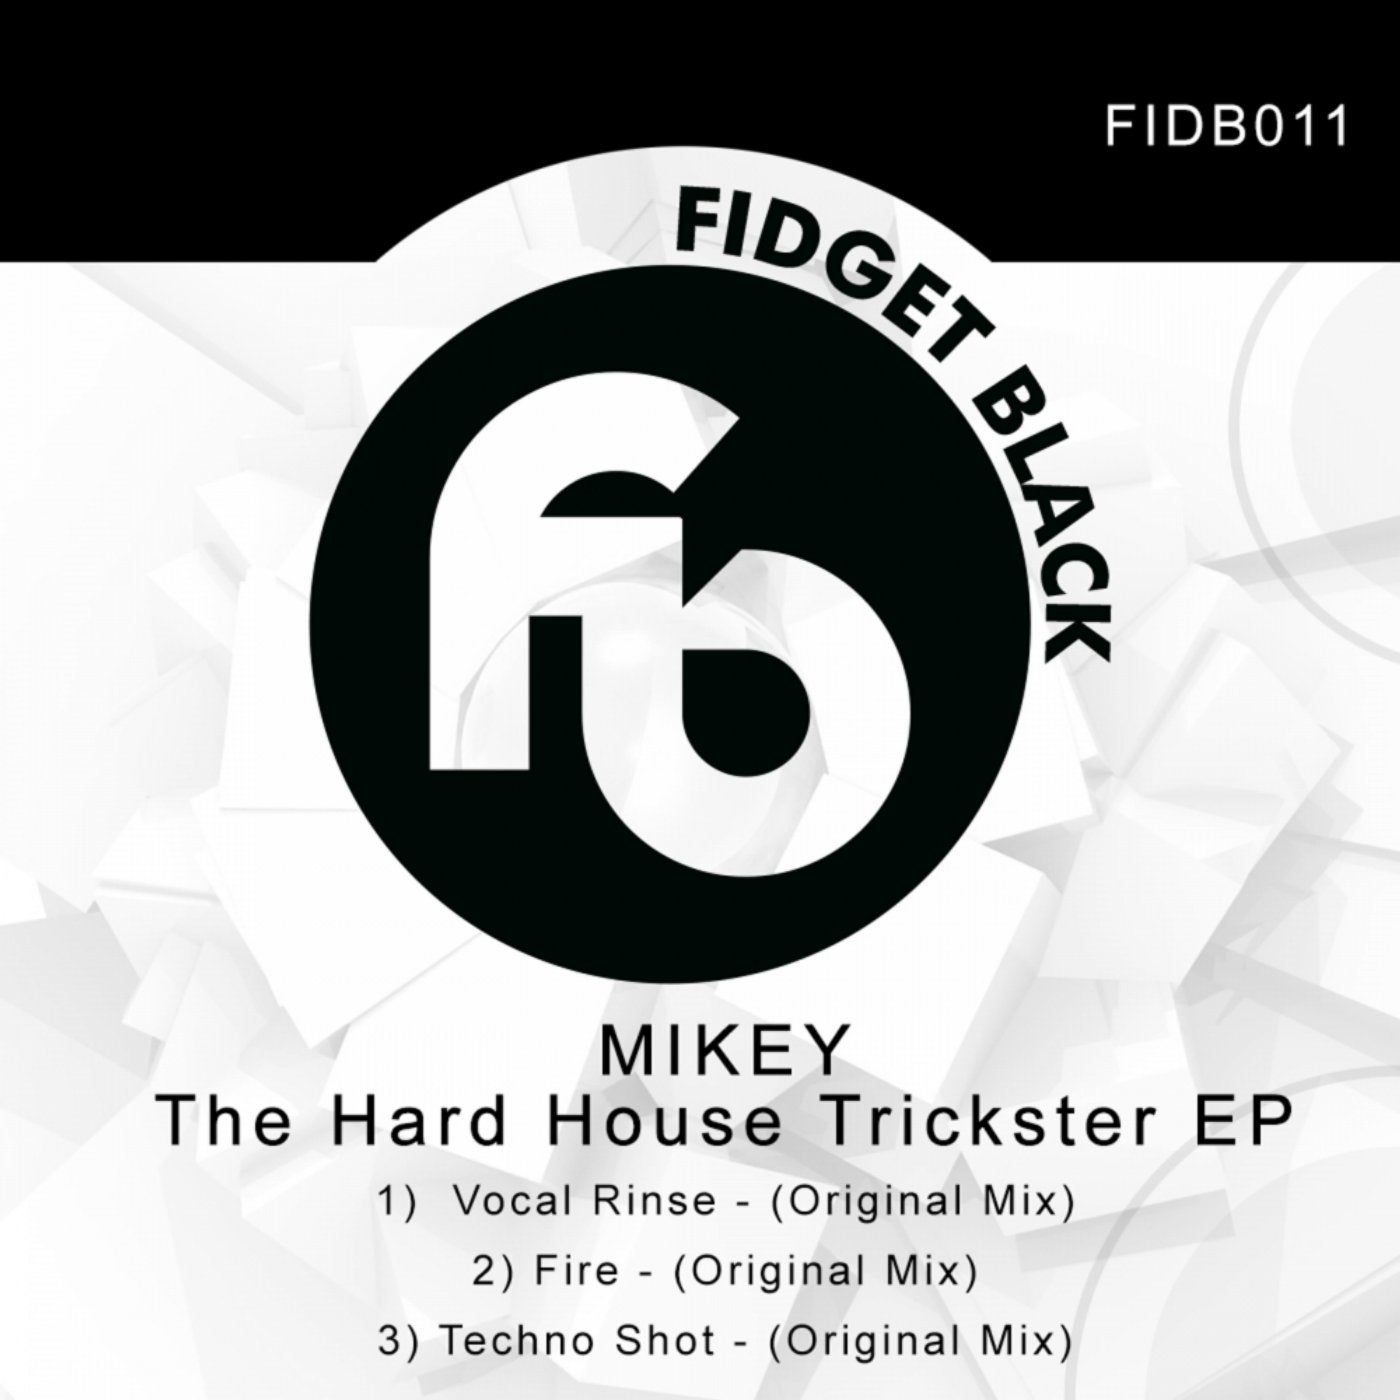 The Hard House Trickster EP